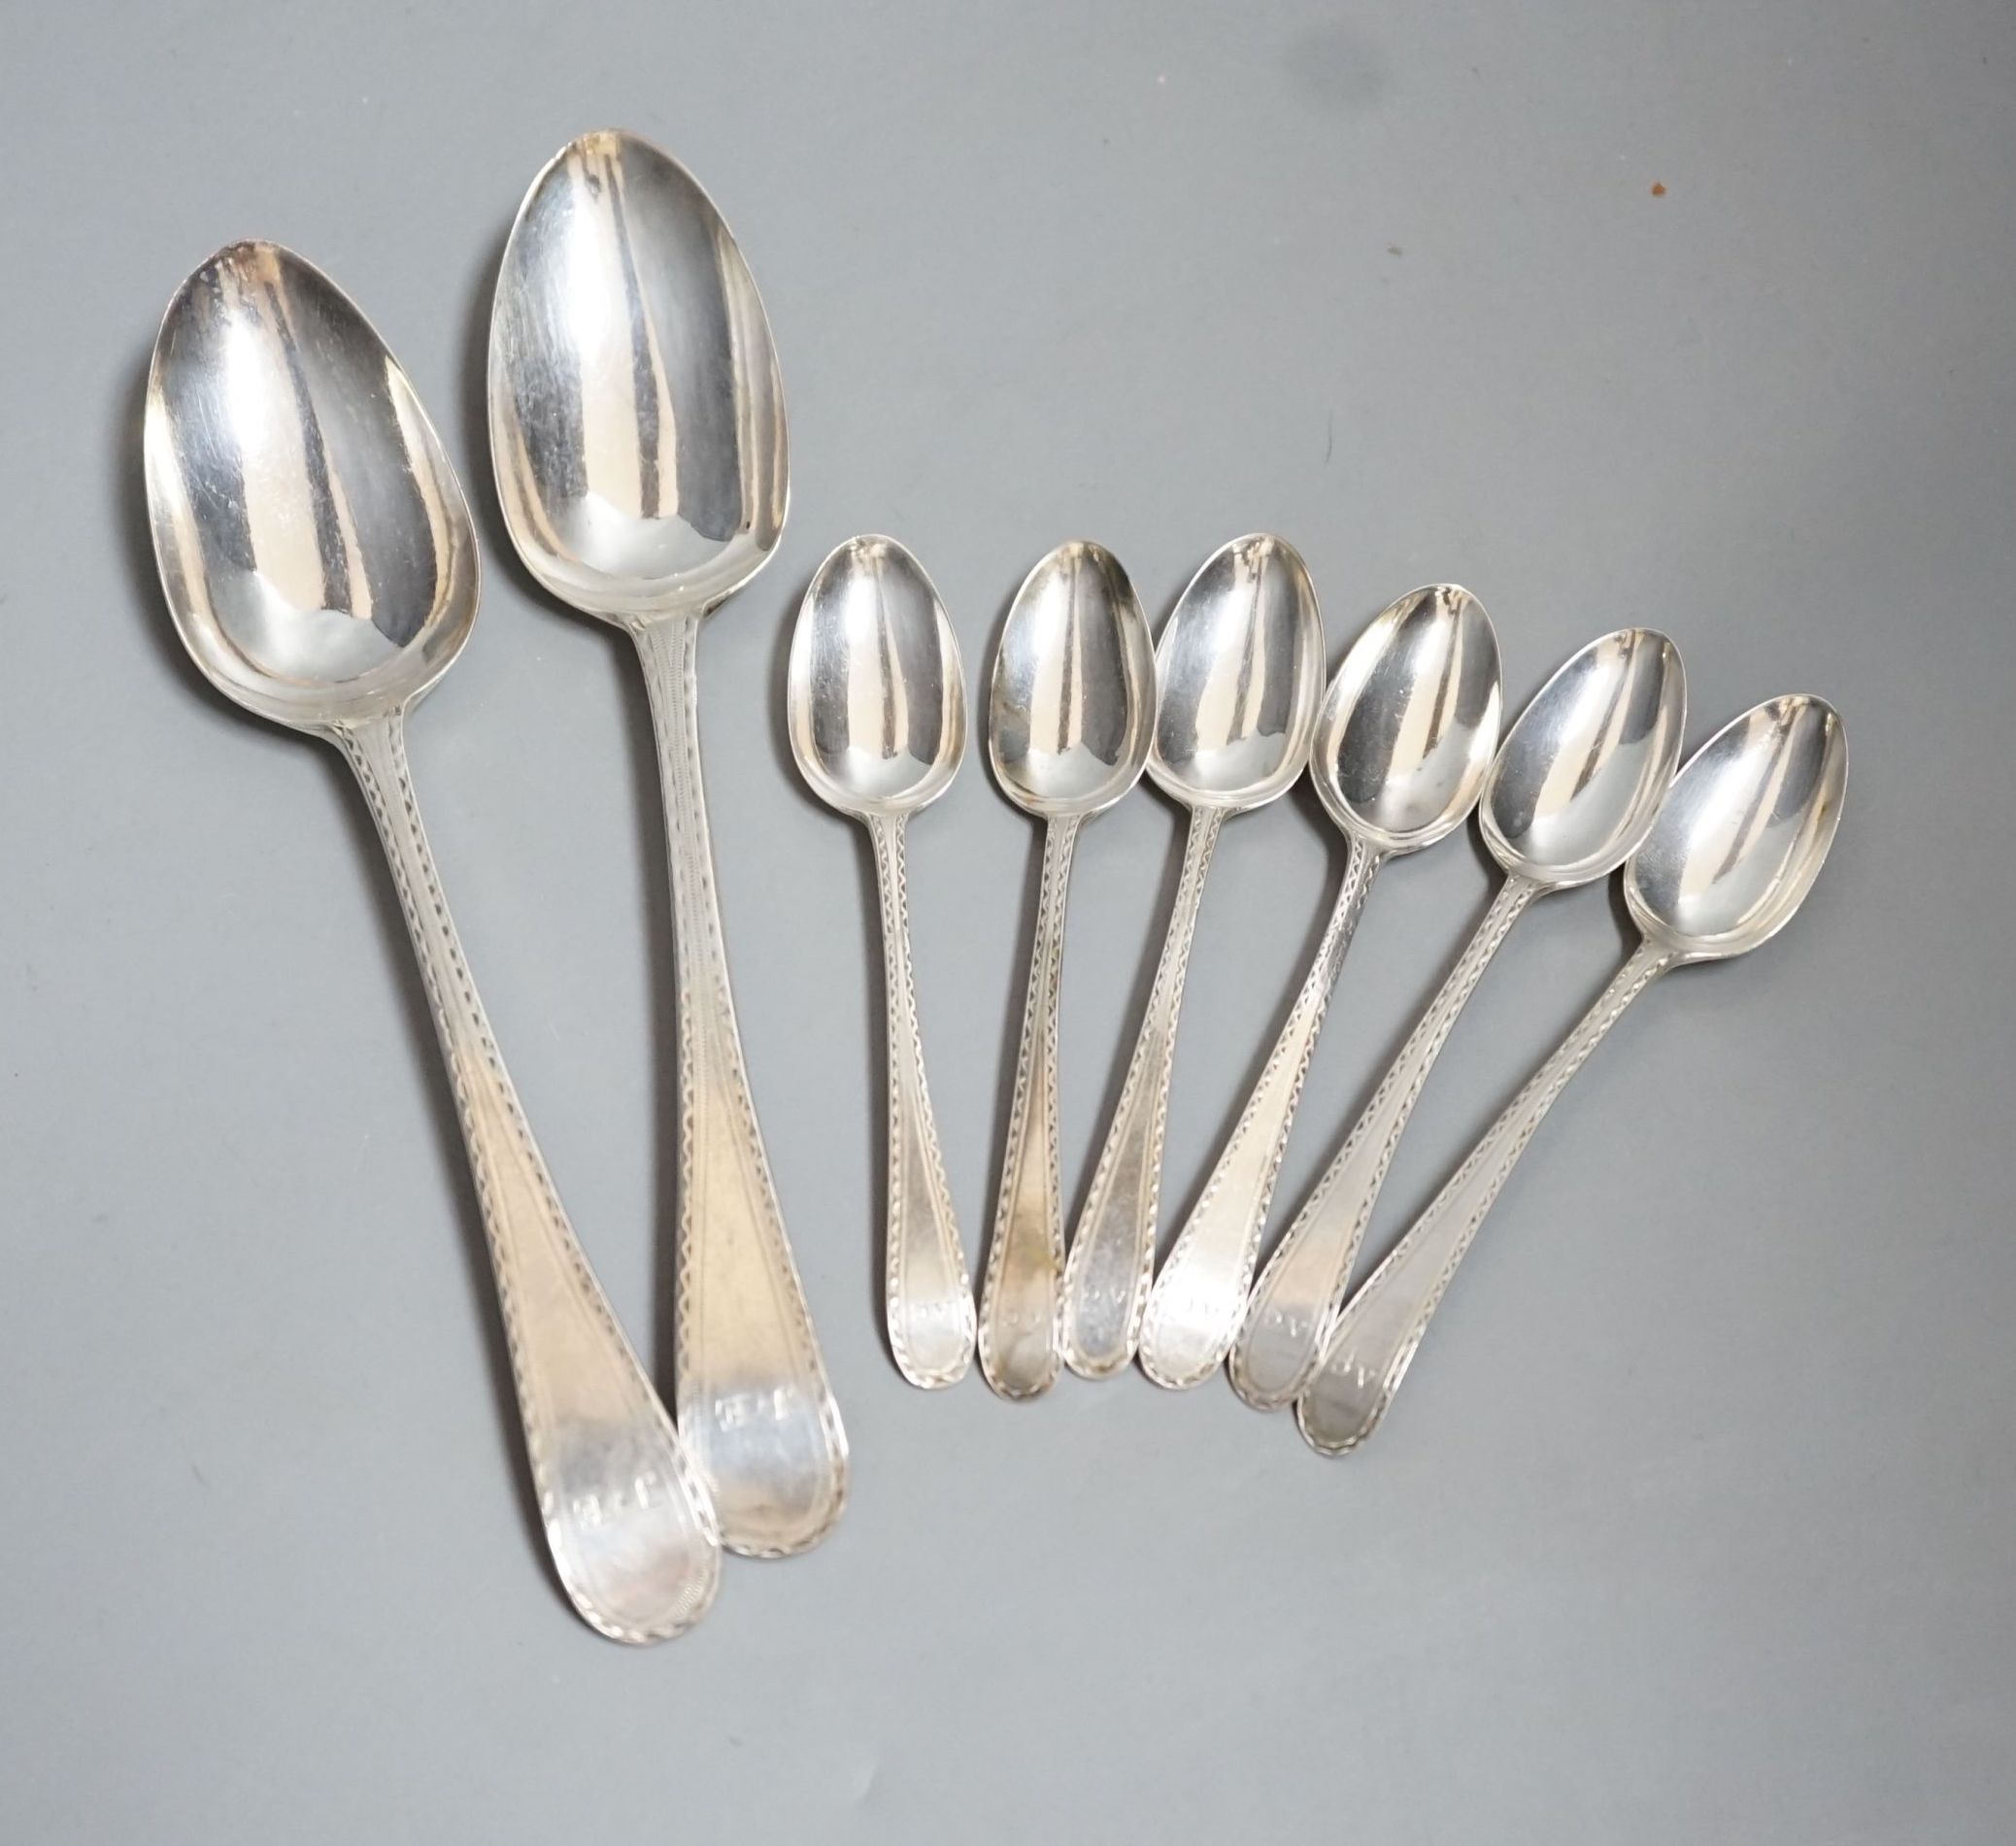 A set of silver George III bright cut engraved silver Old English pattern teaspoons, by Hester Bateman, no date letter and a pair of George III silver bright cut engraved Old English tablespoons, London, 1787